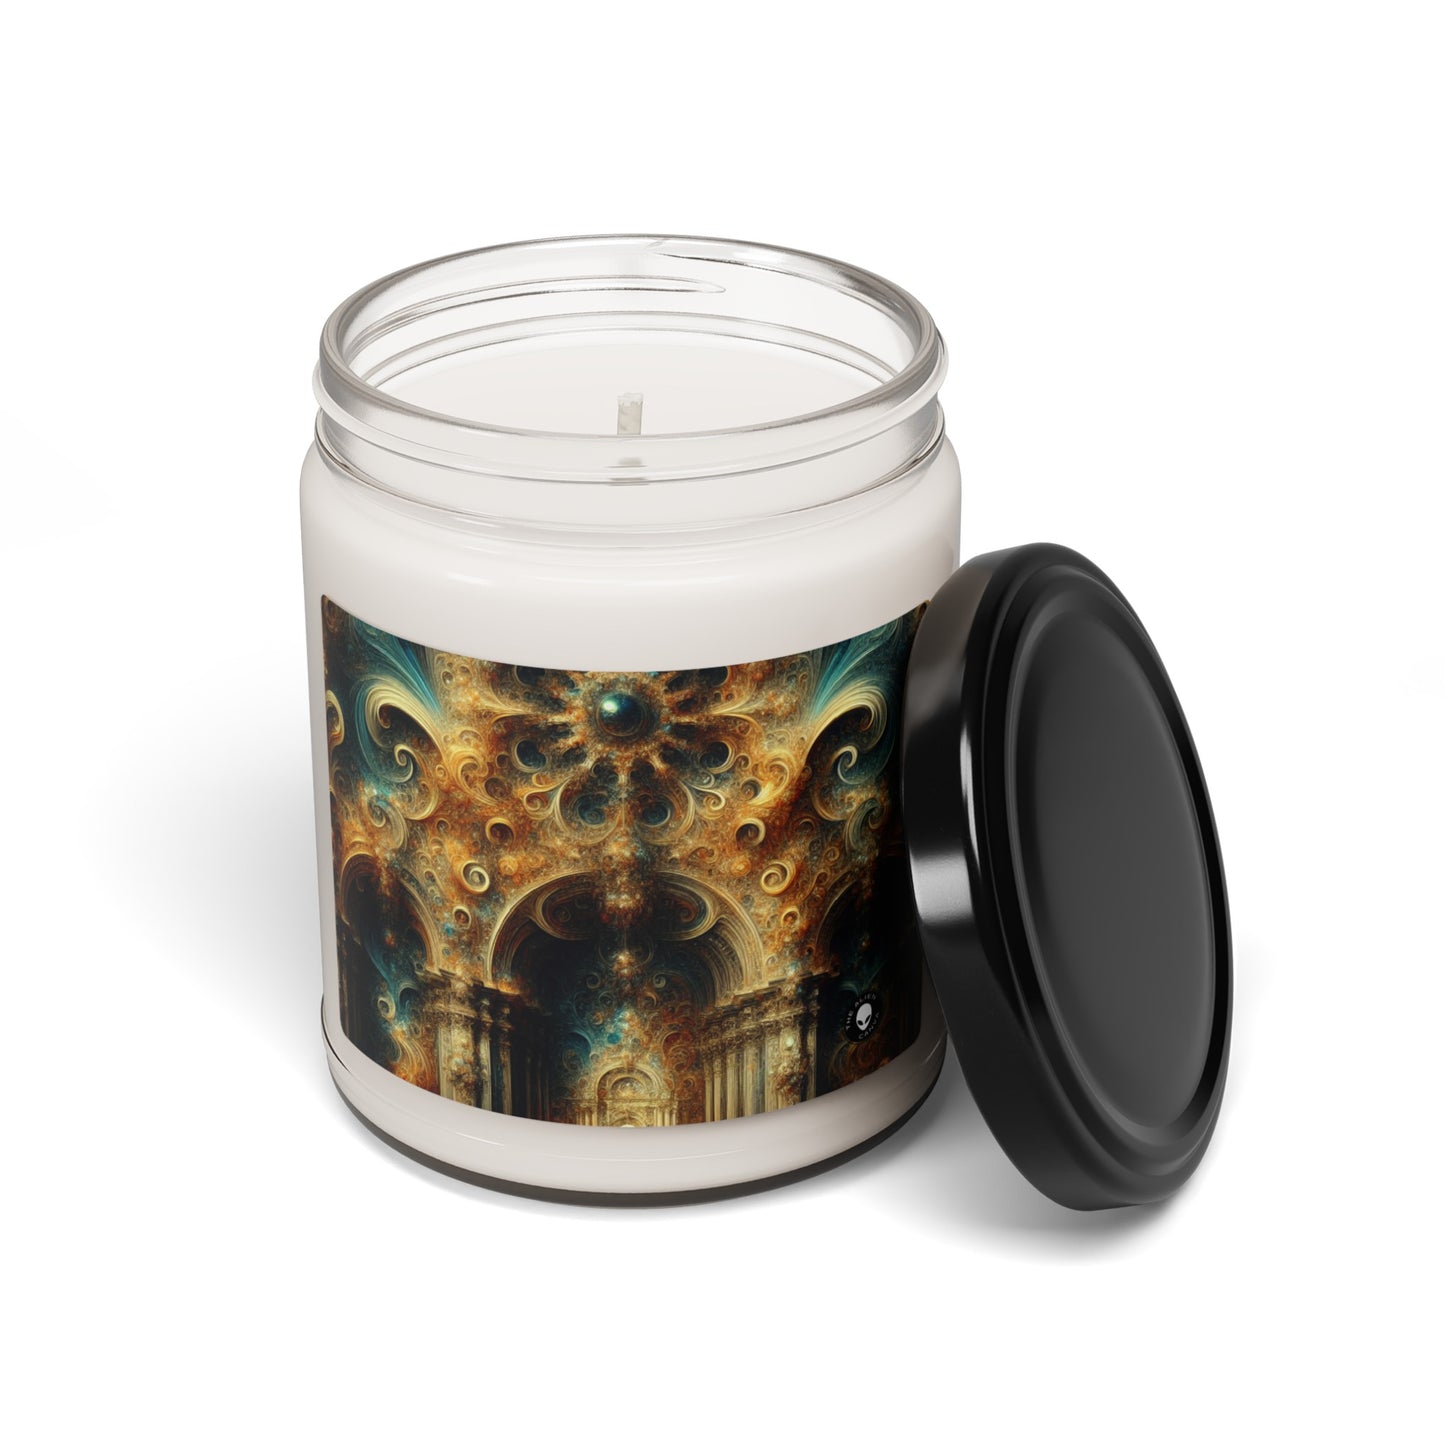 "Opulent Feasting: A Baroque Banquet" - The Alien Scented Soy Candle 9oz Baroque